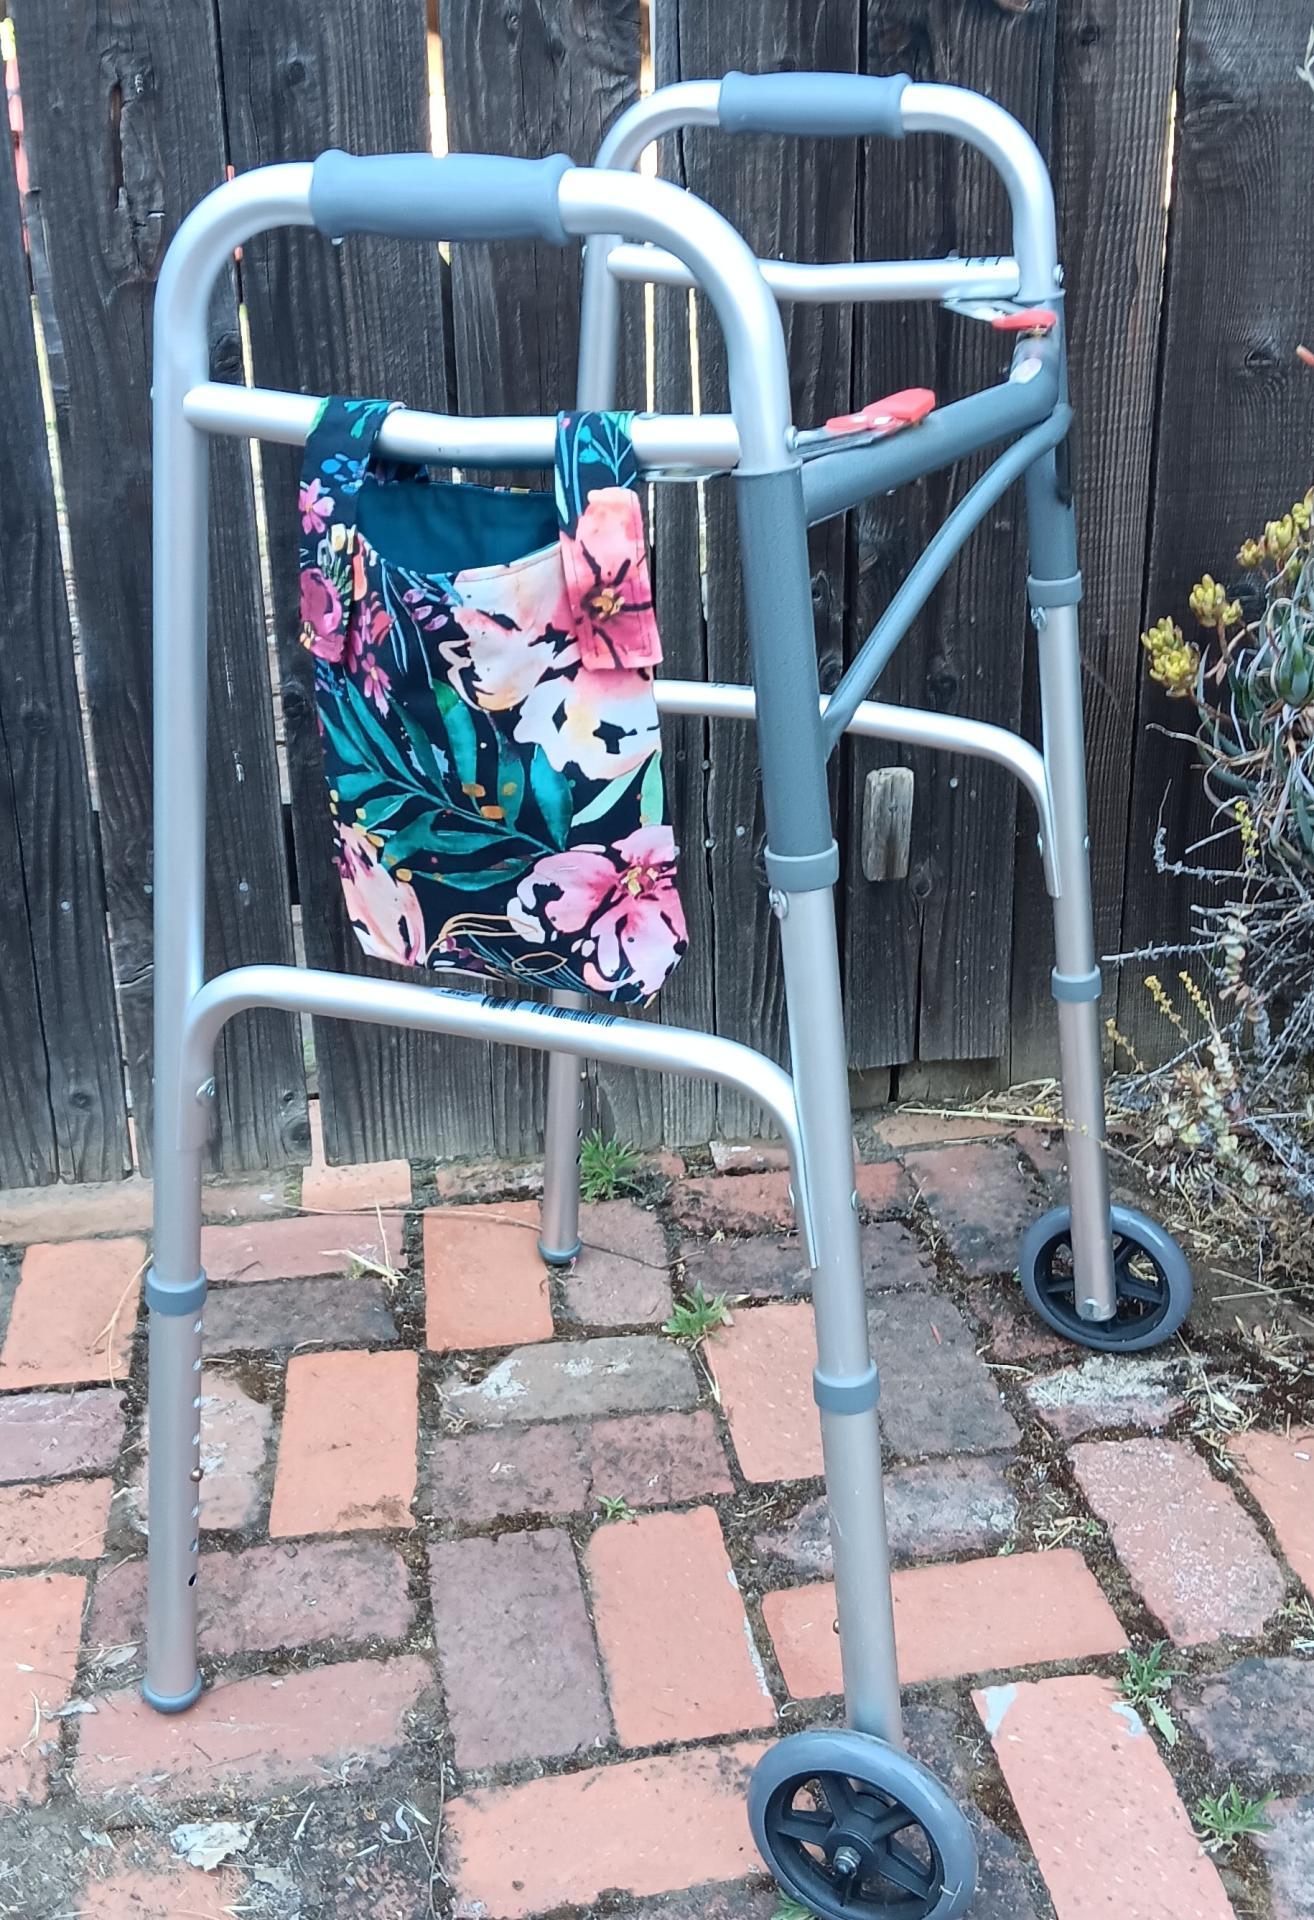 Simple small basic bag for crutch, walker, stroller, scooter handlebars, caddy, southwest theme, turquoise